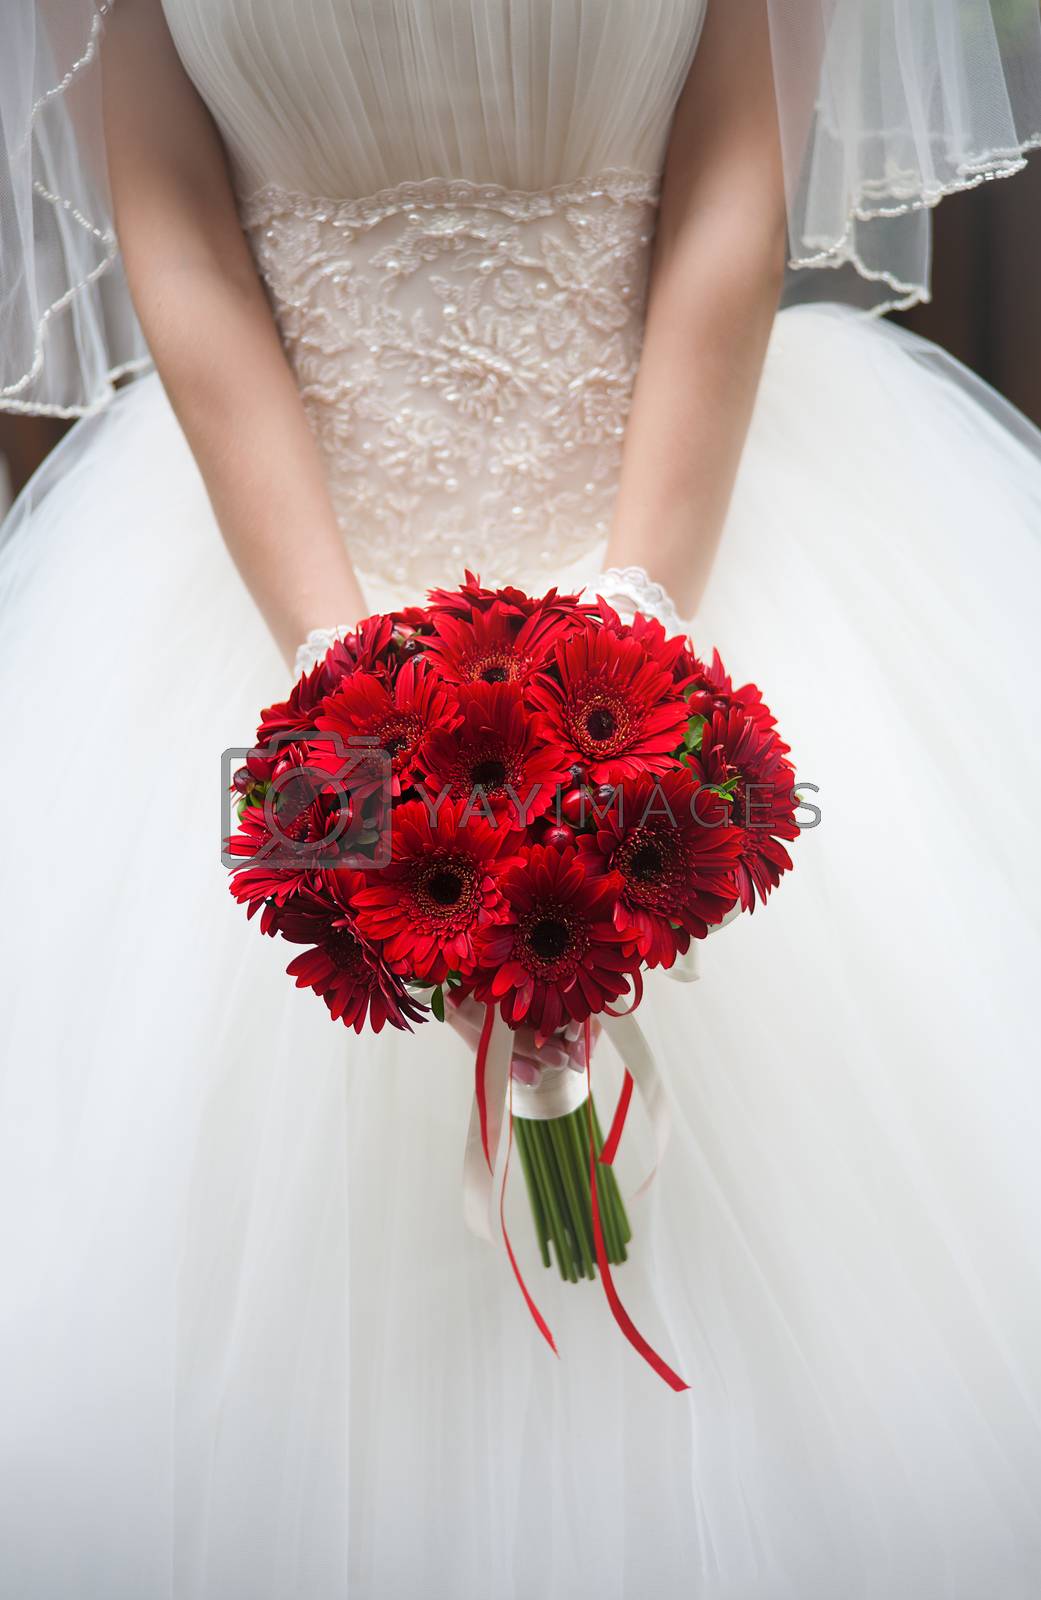 Royalty free image of wedding bouquet in hands of the bride. by sfinks